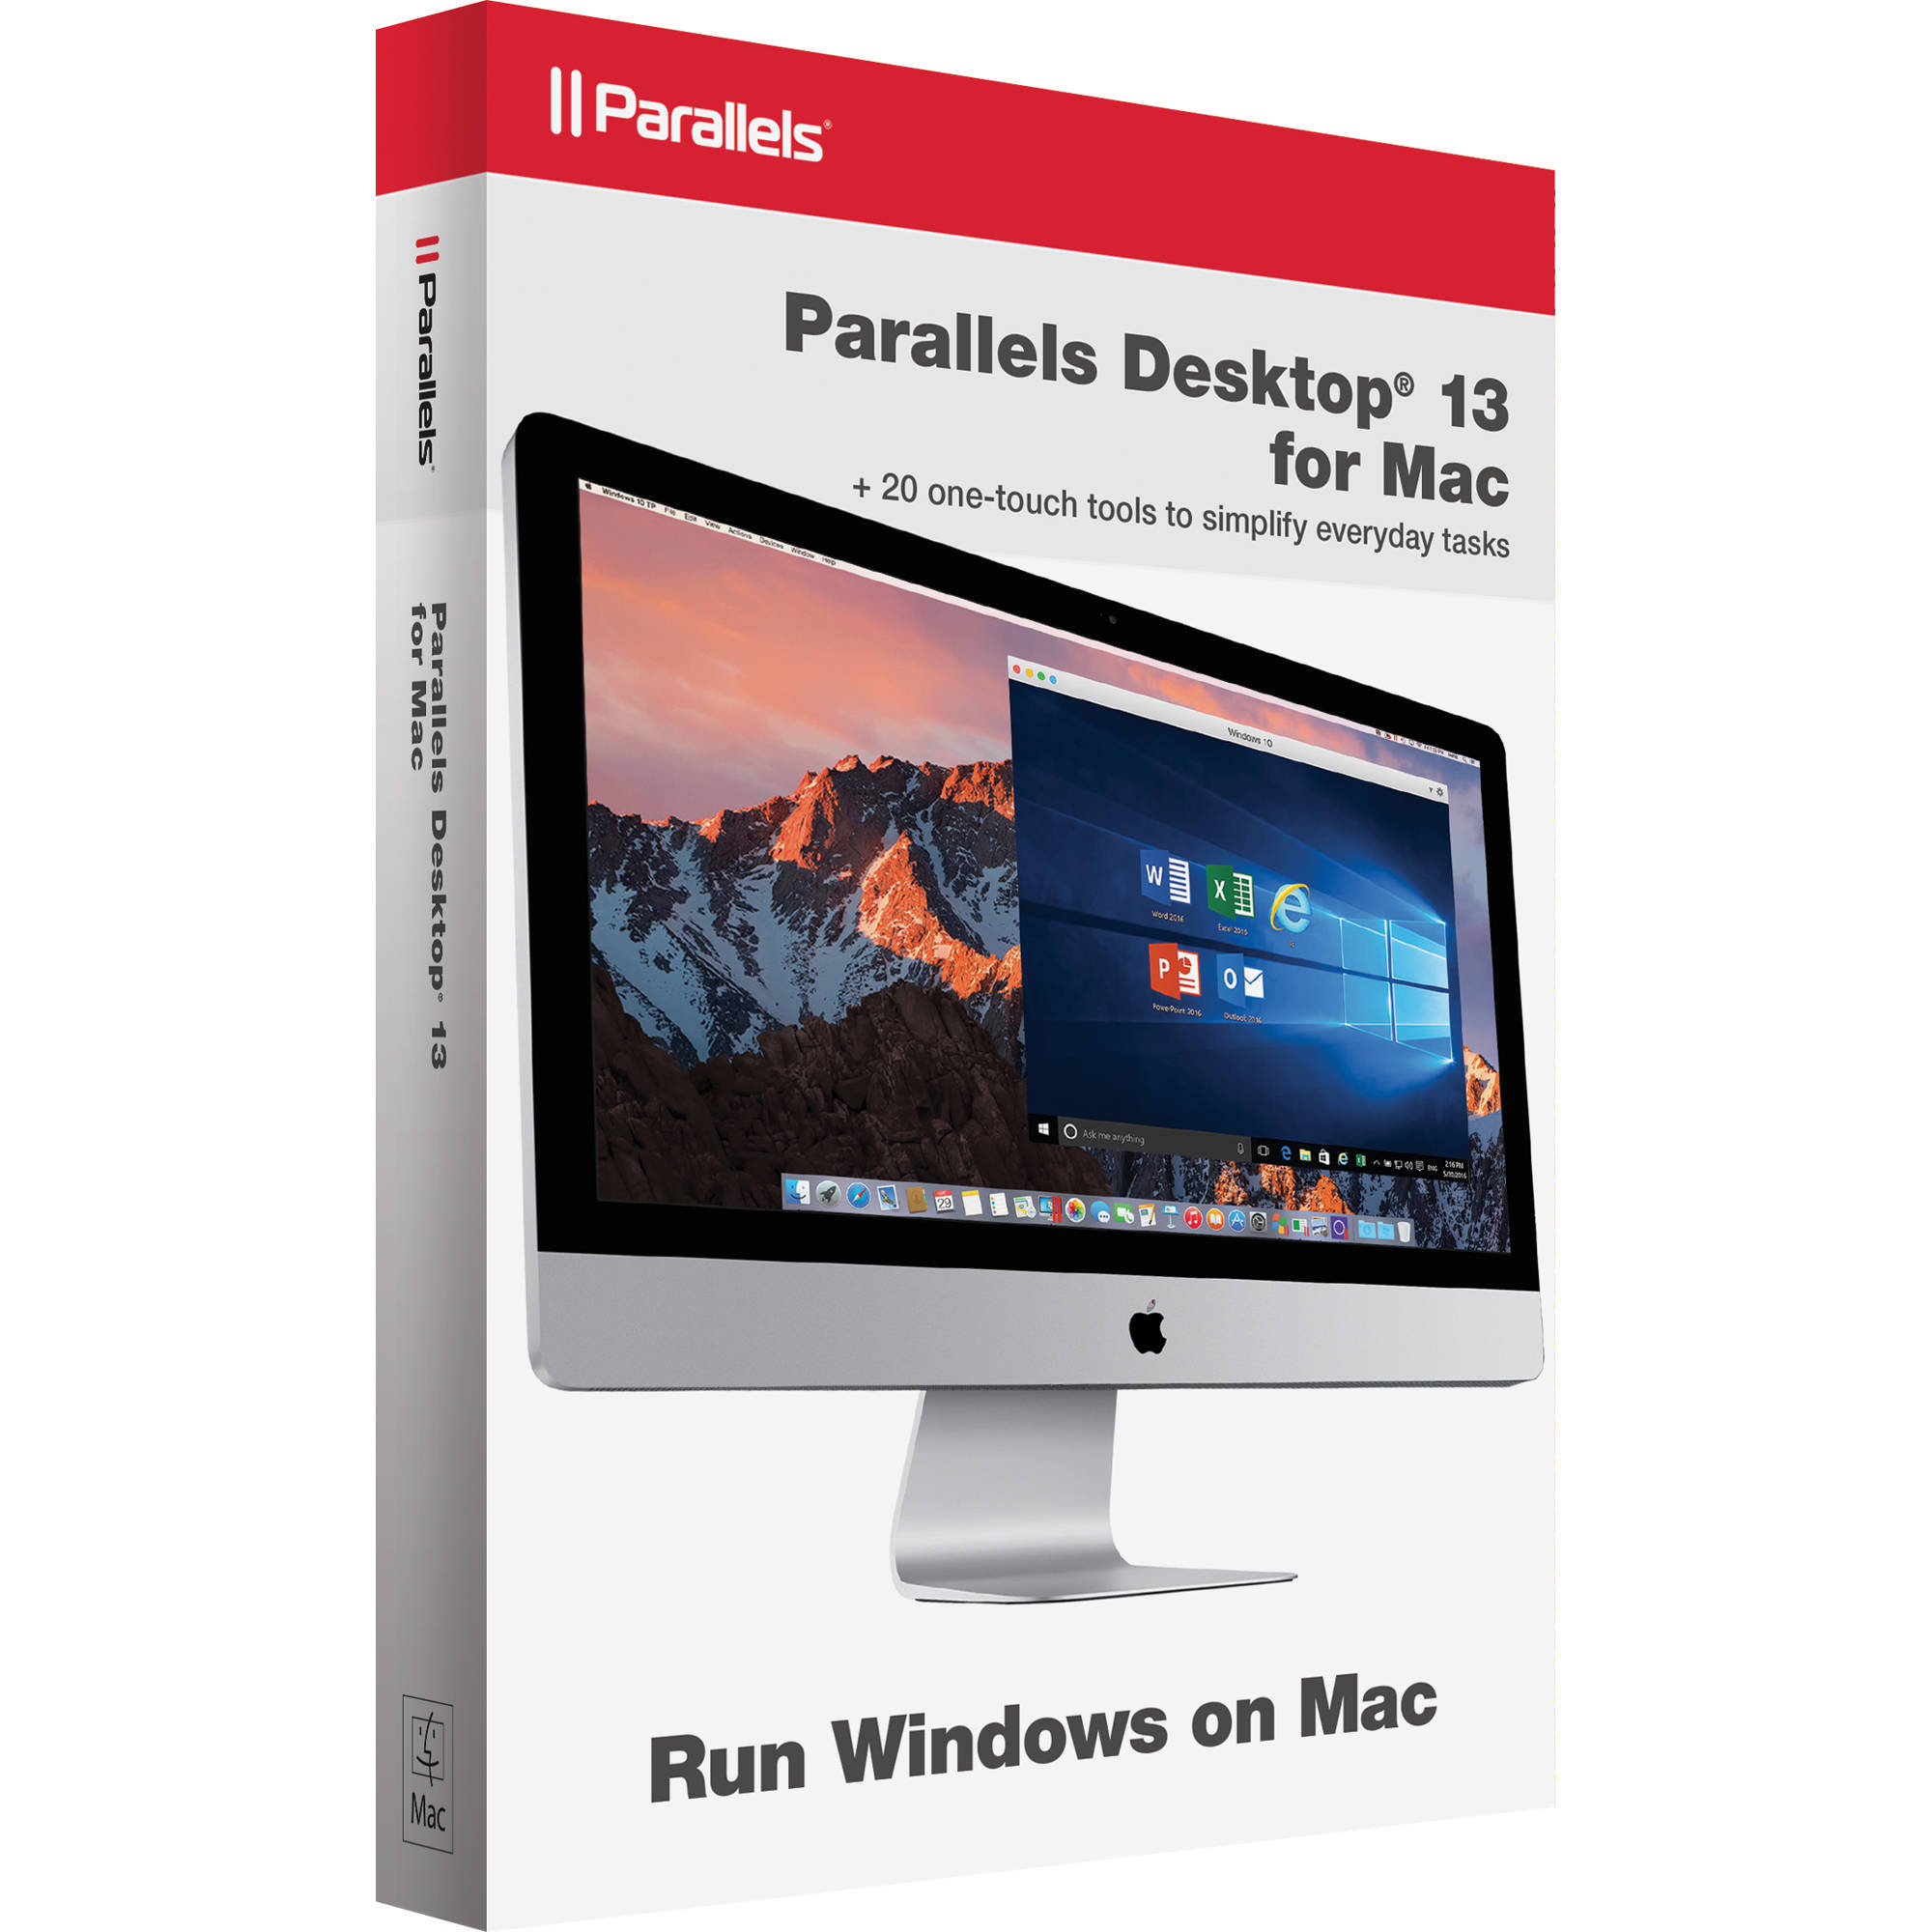 parallels for mac activation key